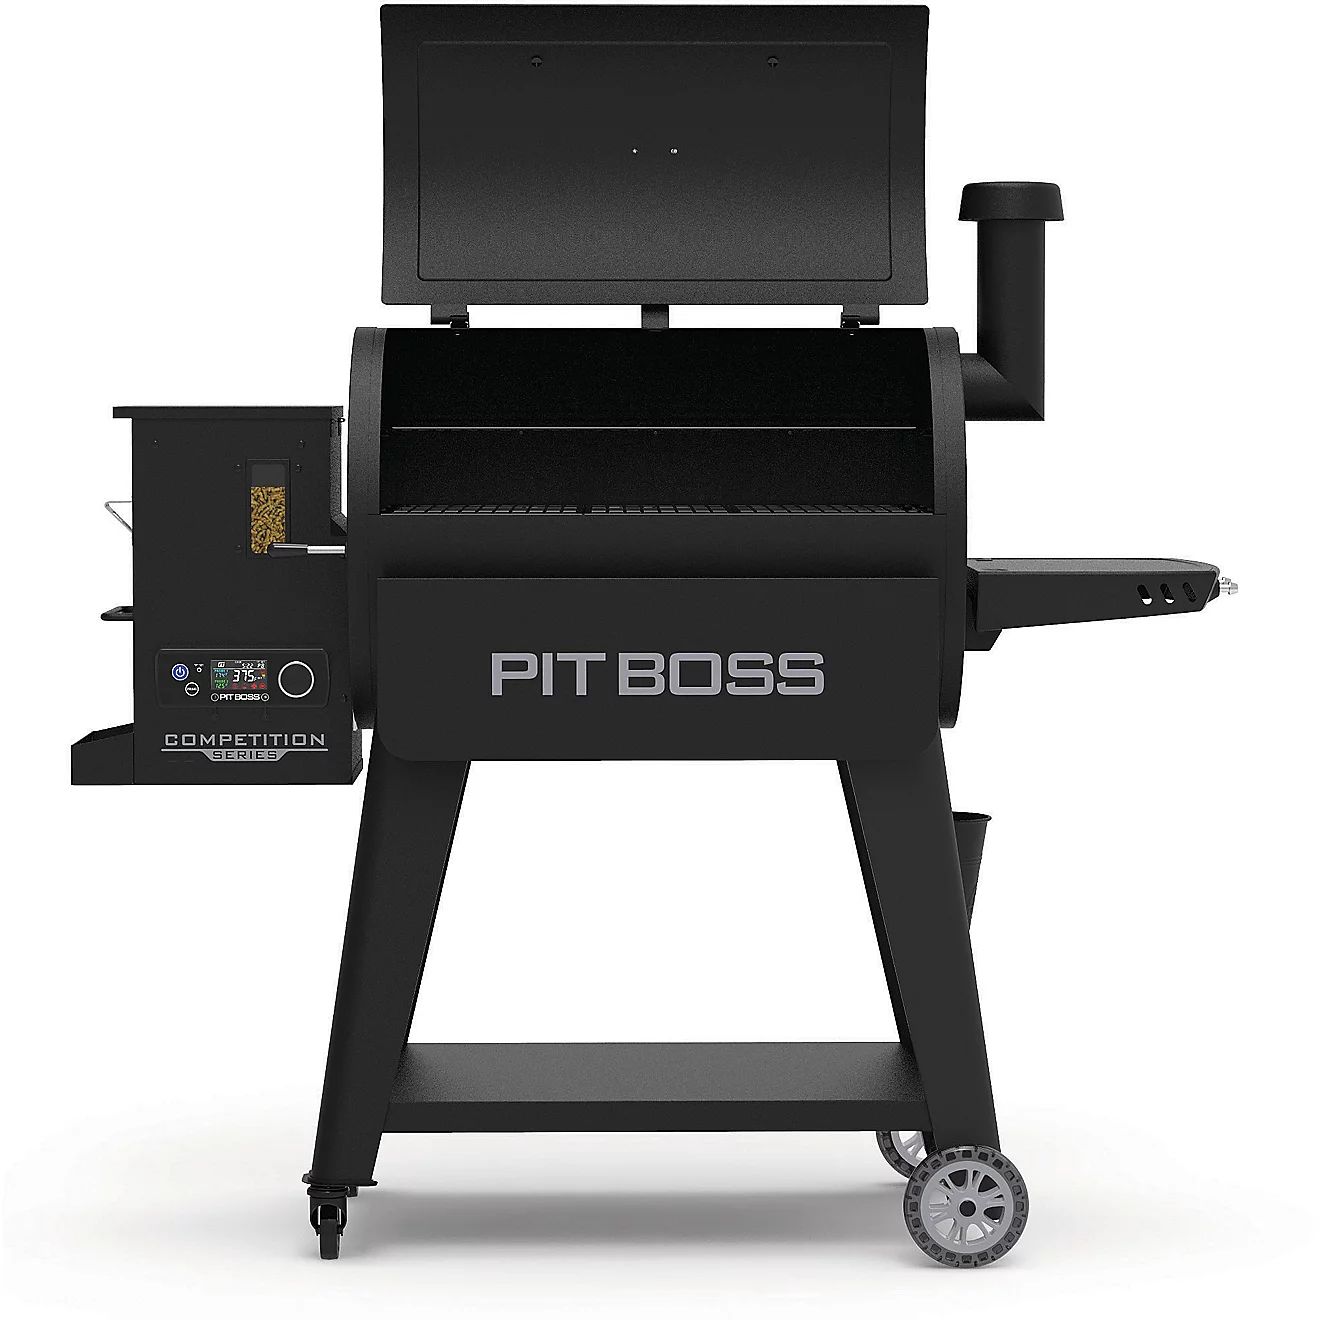 Pit Boss 850 Competition Series Pellet Grill | Academy Sports + Outdoors